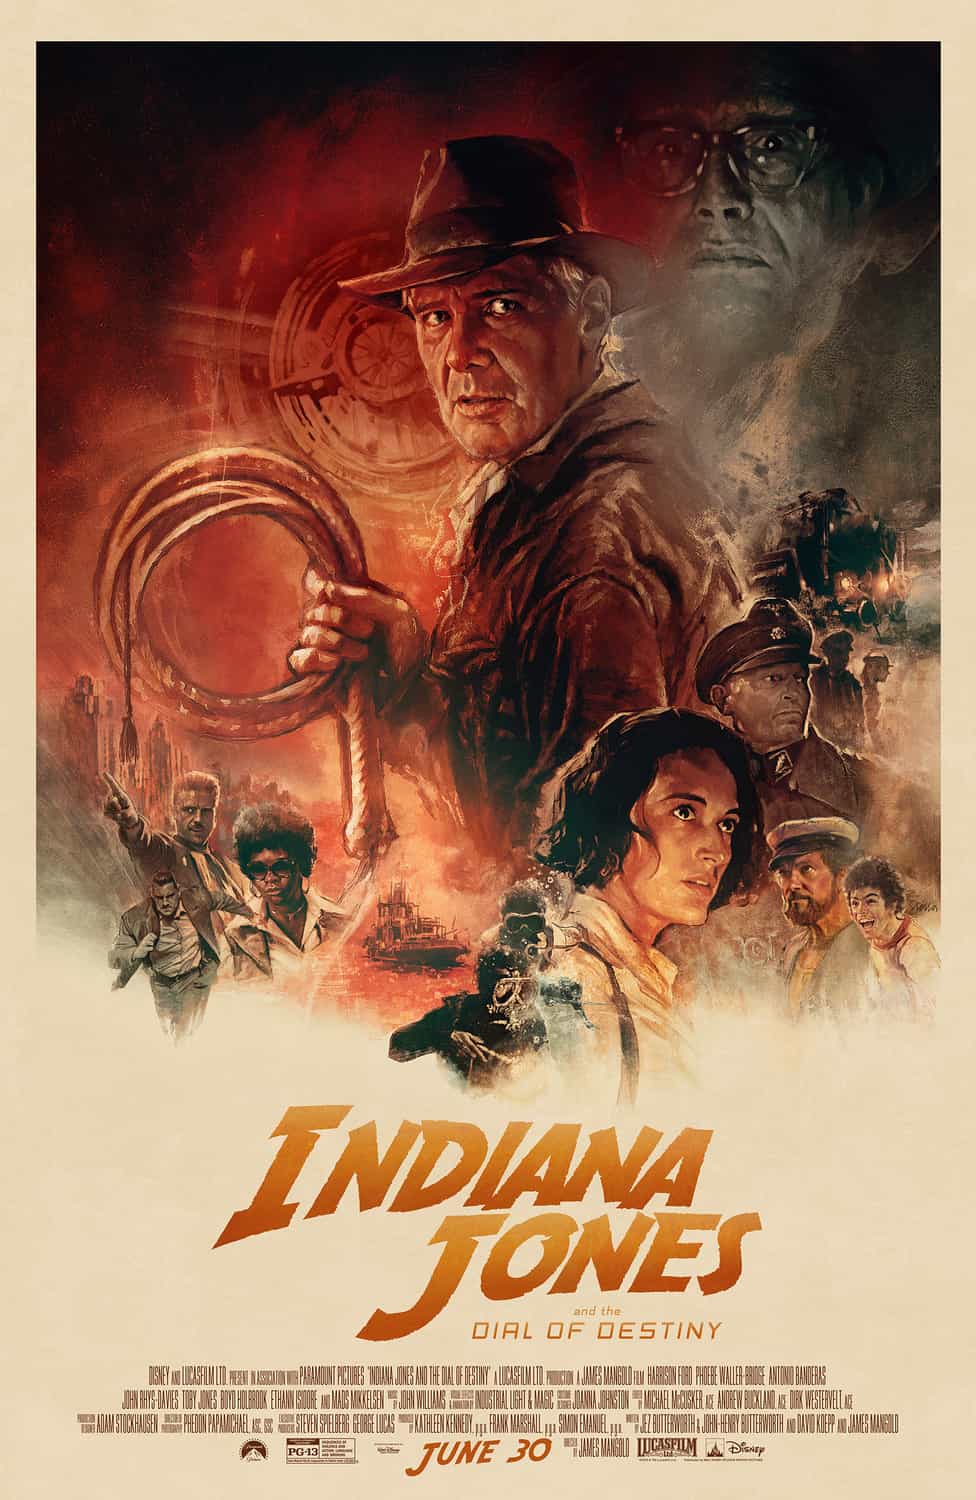 US Box Office Weekend Report 30th June - 2nd July 2023:  Indiana Jones and the Dial of Destiny is at the top of the US box office on its debut weekend